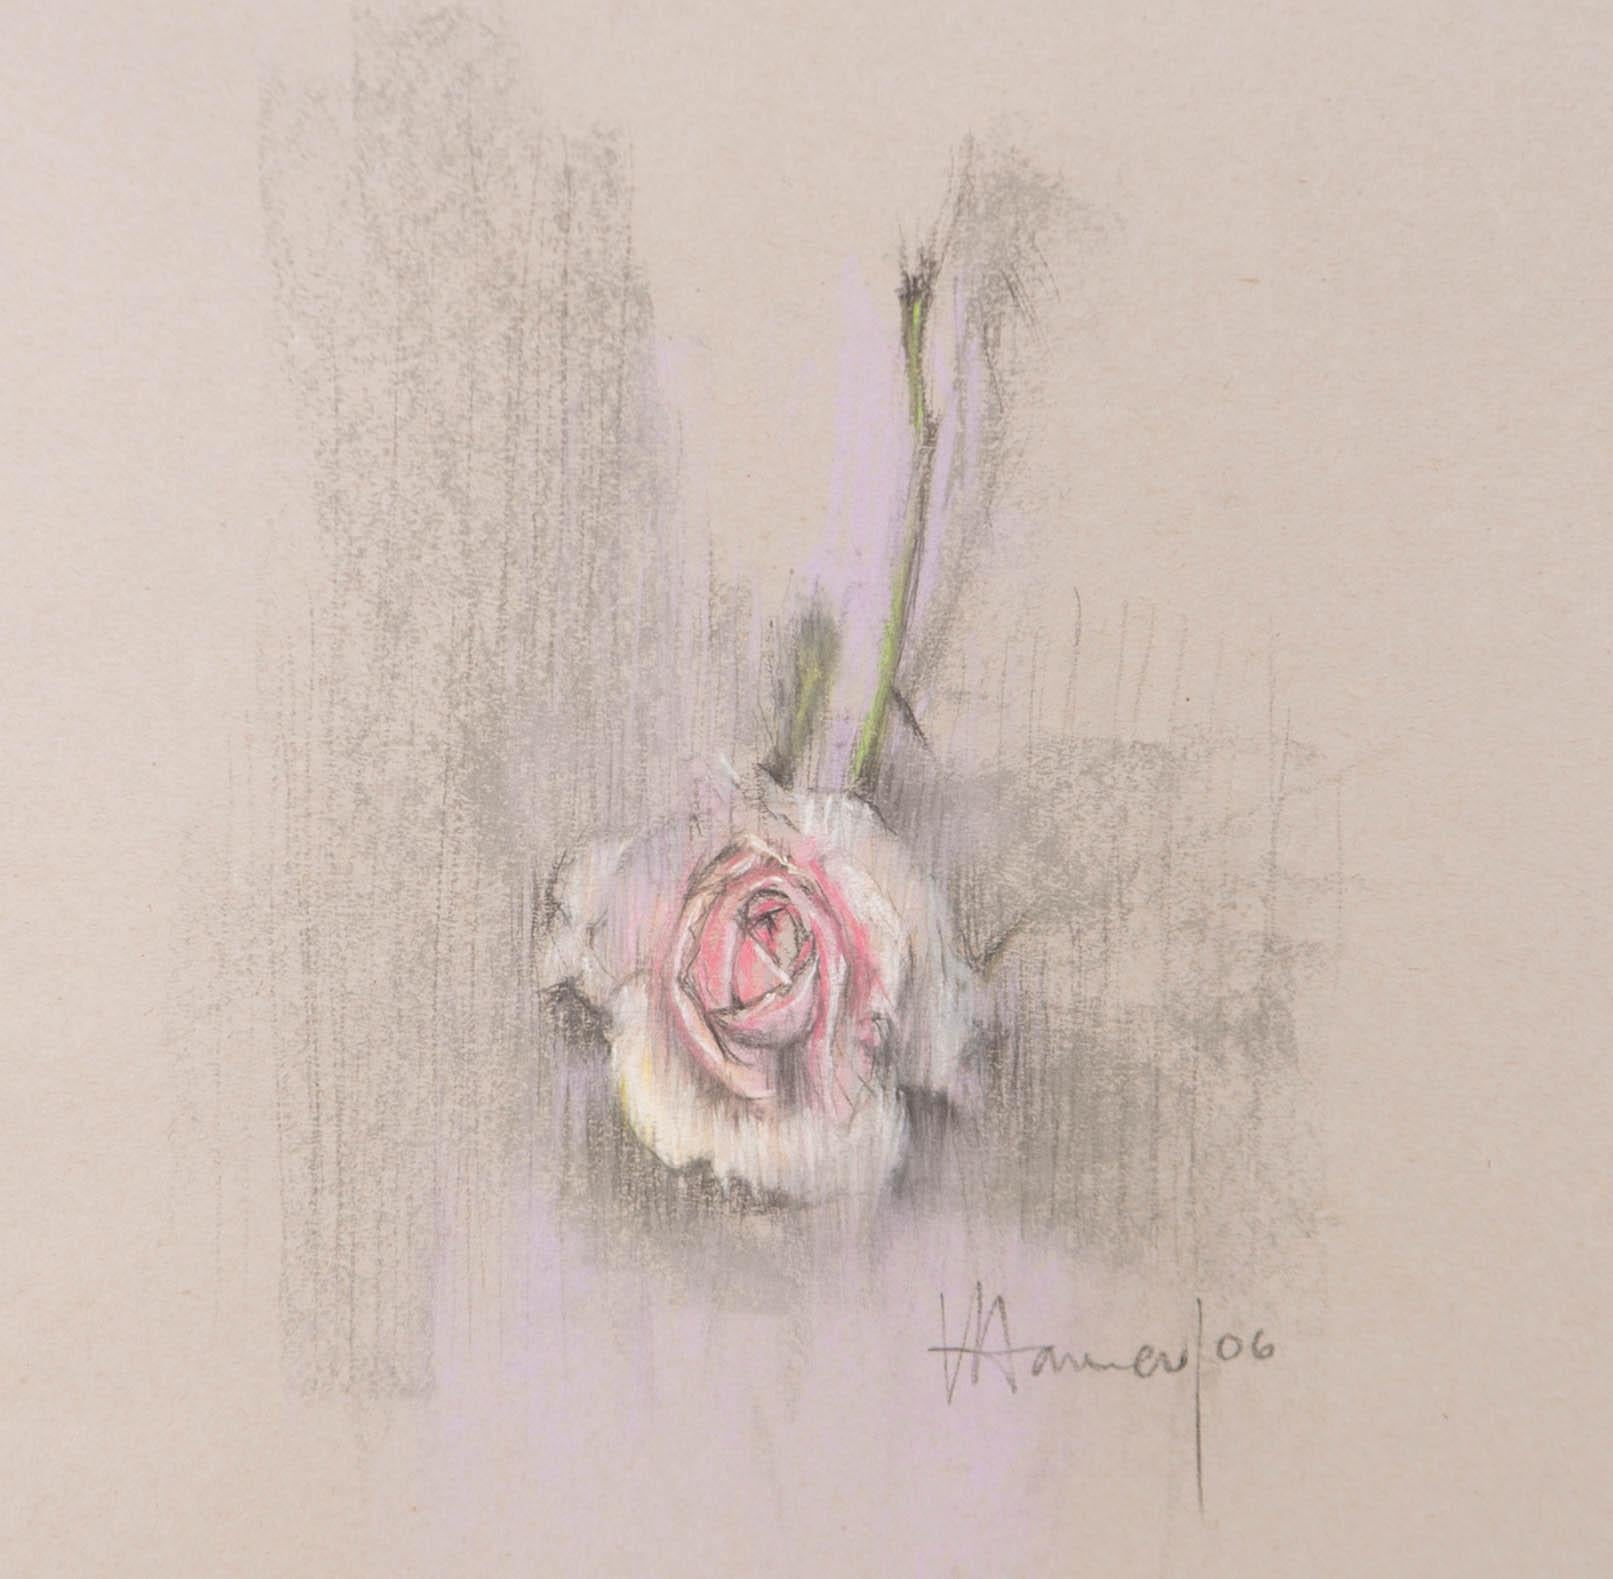 A charming pastel drawing by the British artist Val Hamer. The scene depicts a single light pink rose. In rough strokes, the artist was able to portray the simple yet beautiful essence of the flower depicted. Signed and dated to the lower right-hand